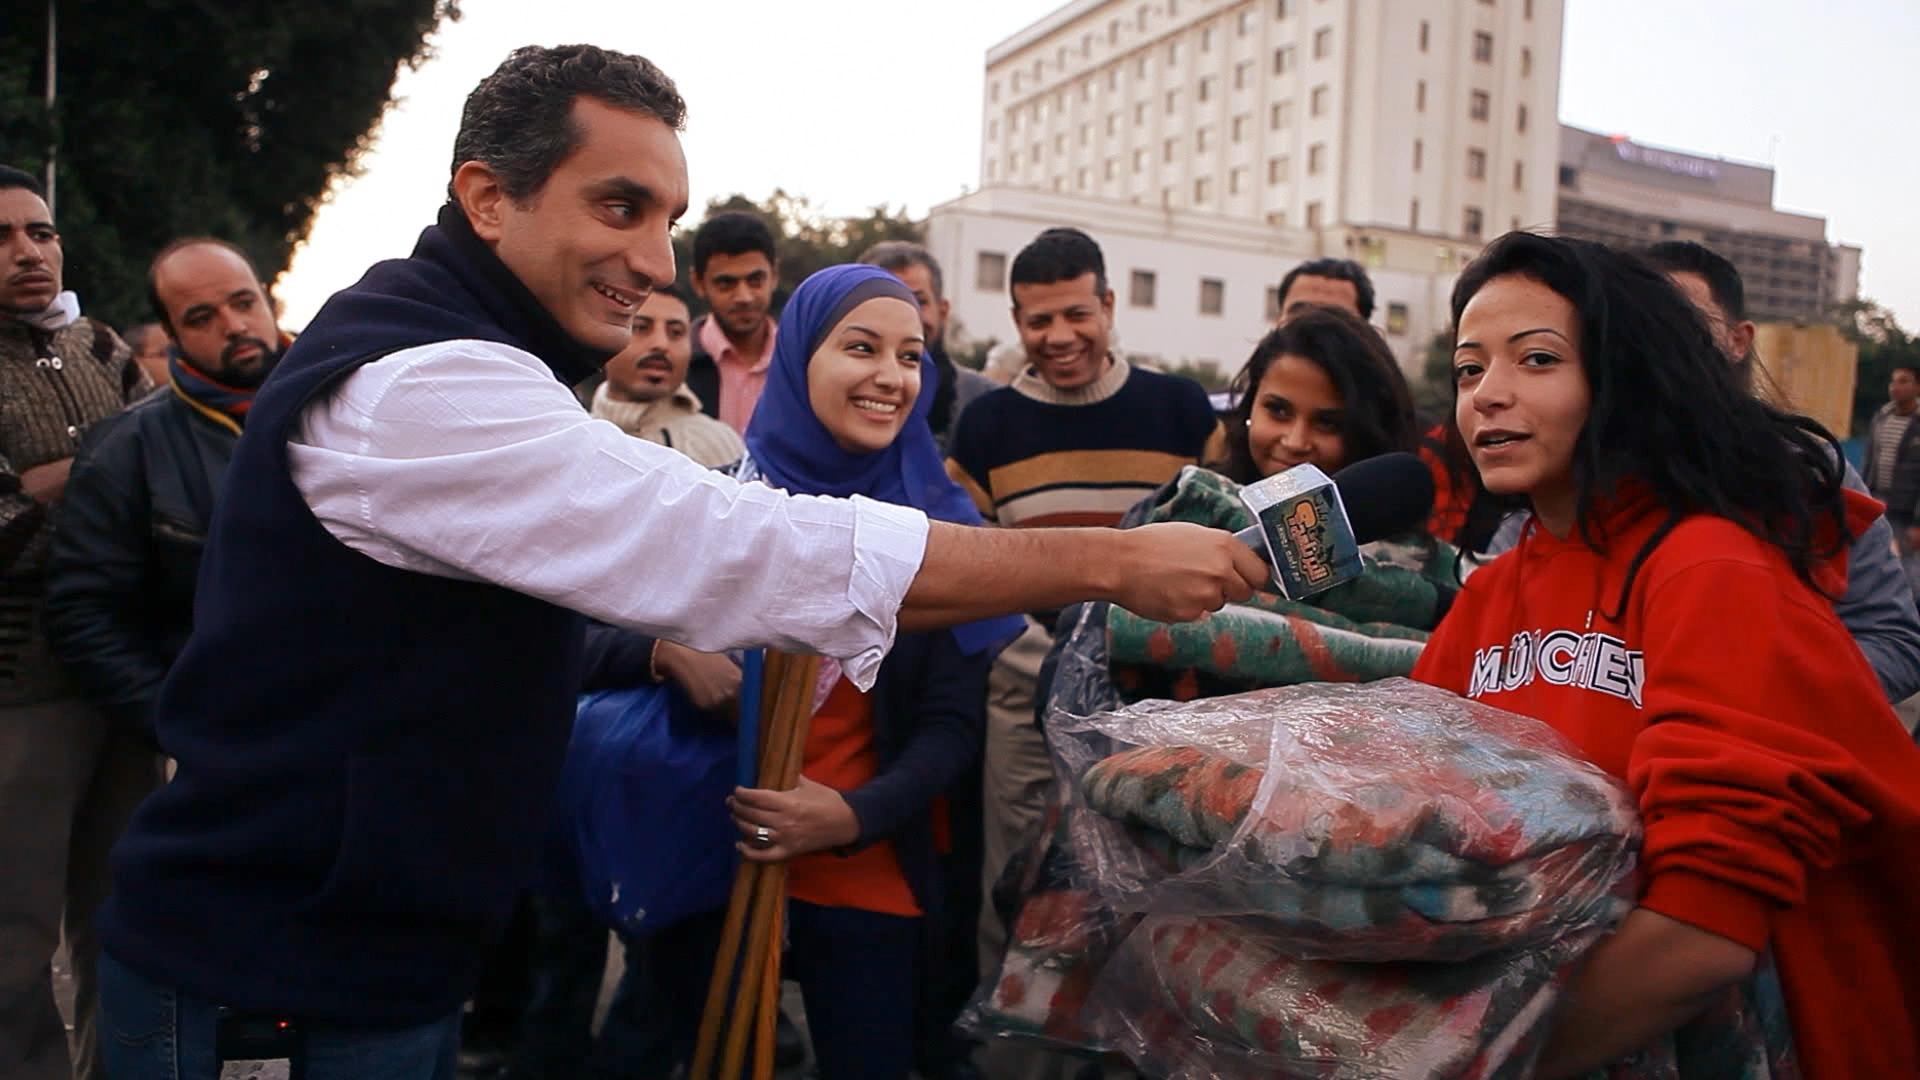 Bassem Youssef interviewing people on the streets of Cairo in the early days of his transition from a heart surgeon to a political satirist, November 2011.